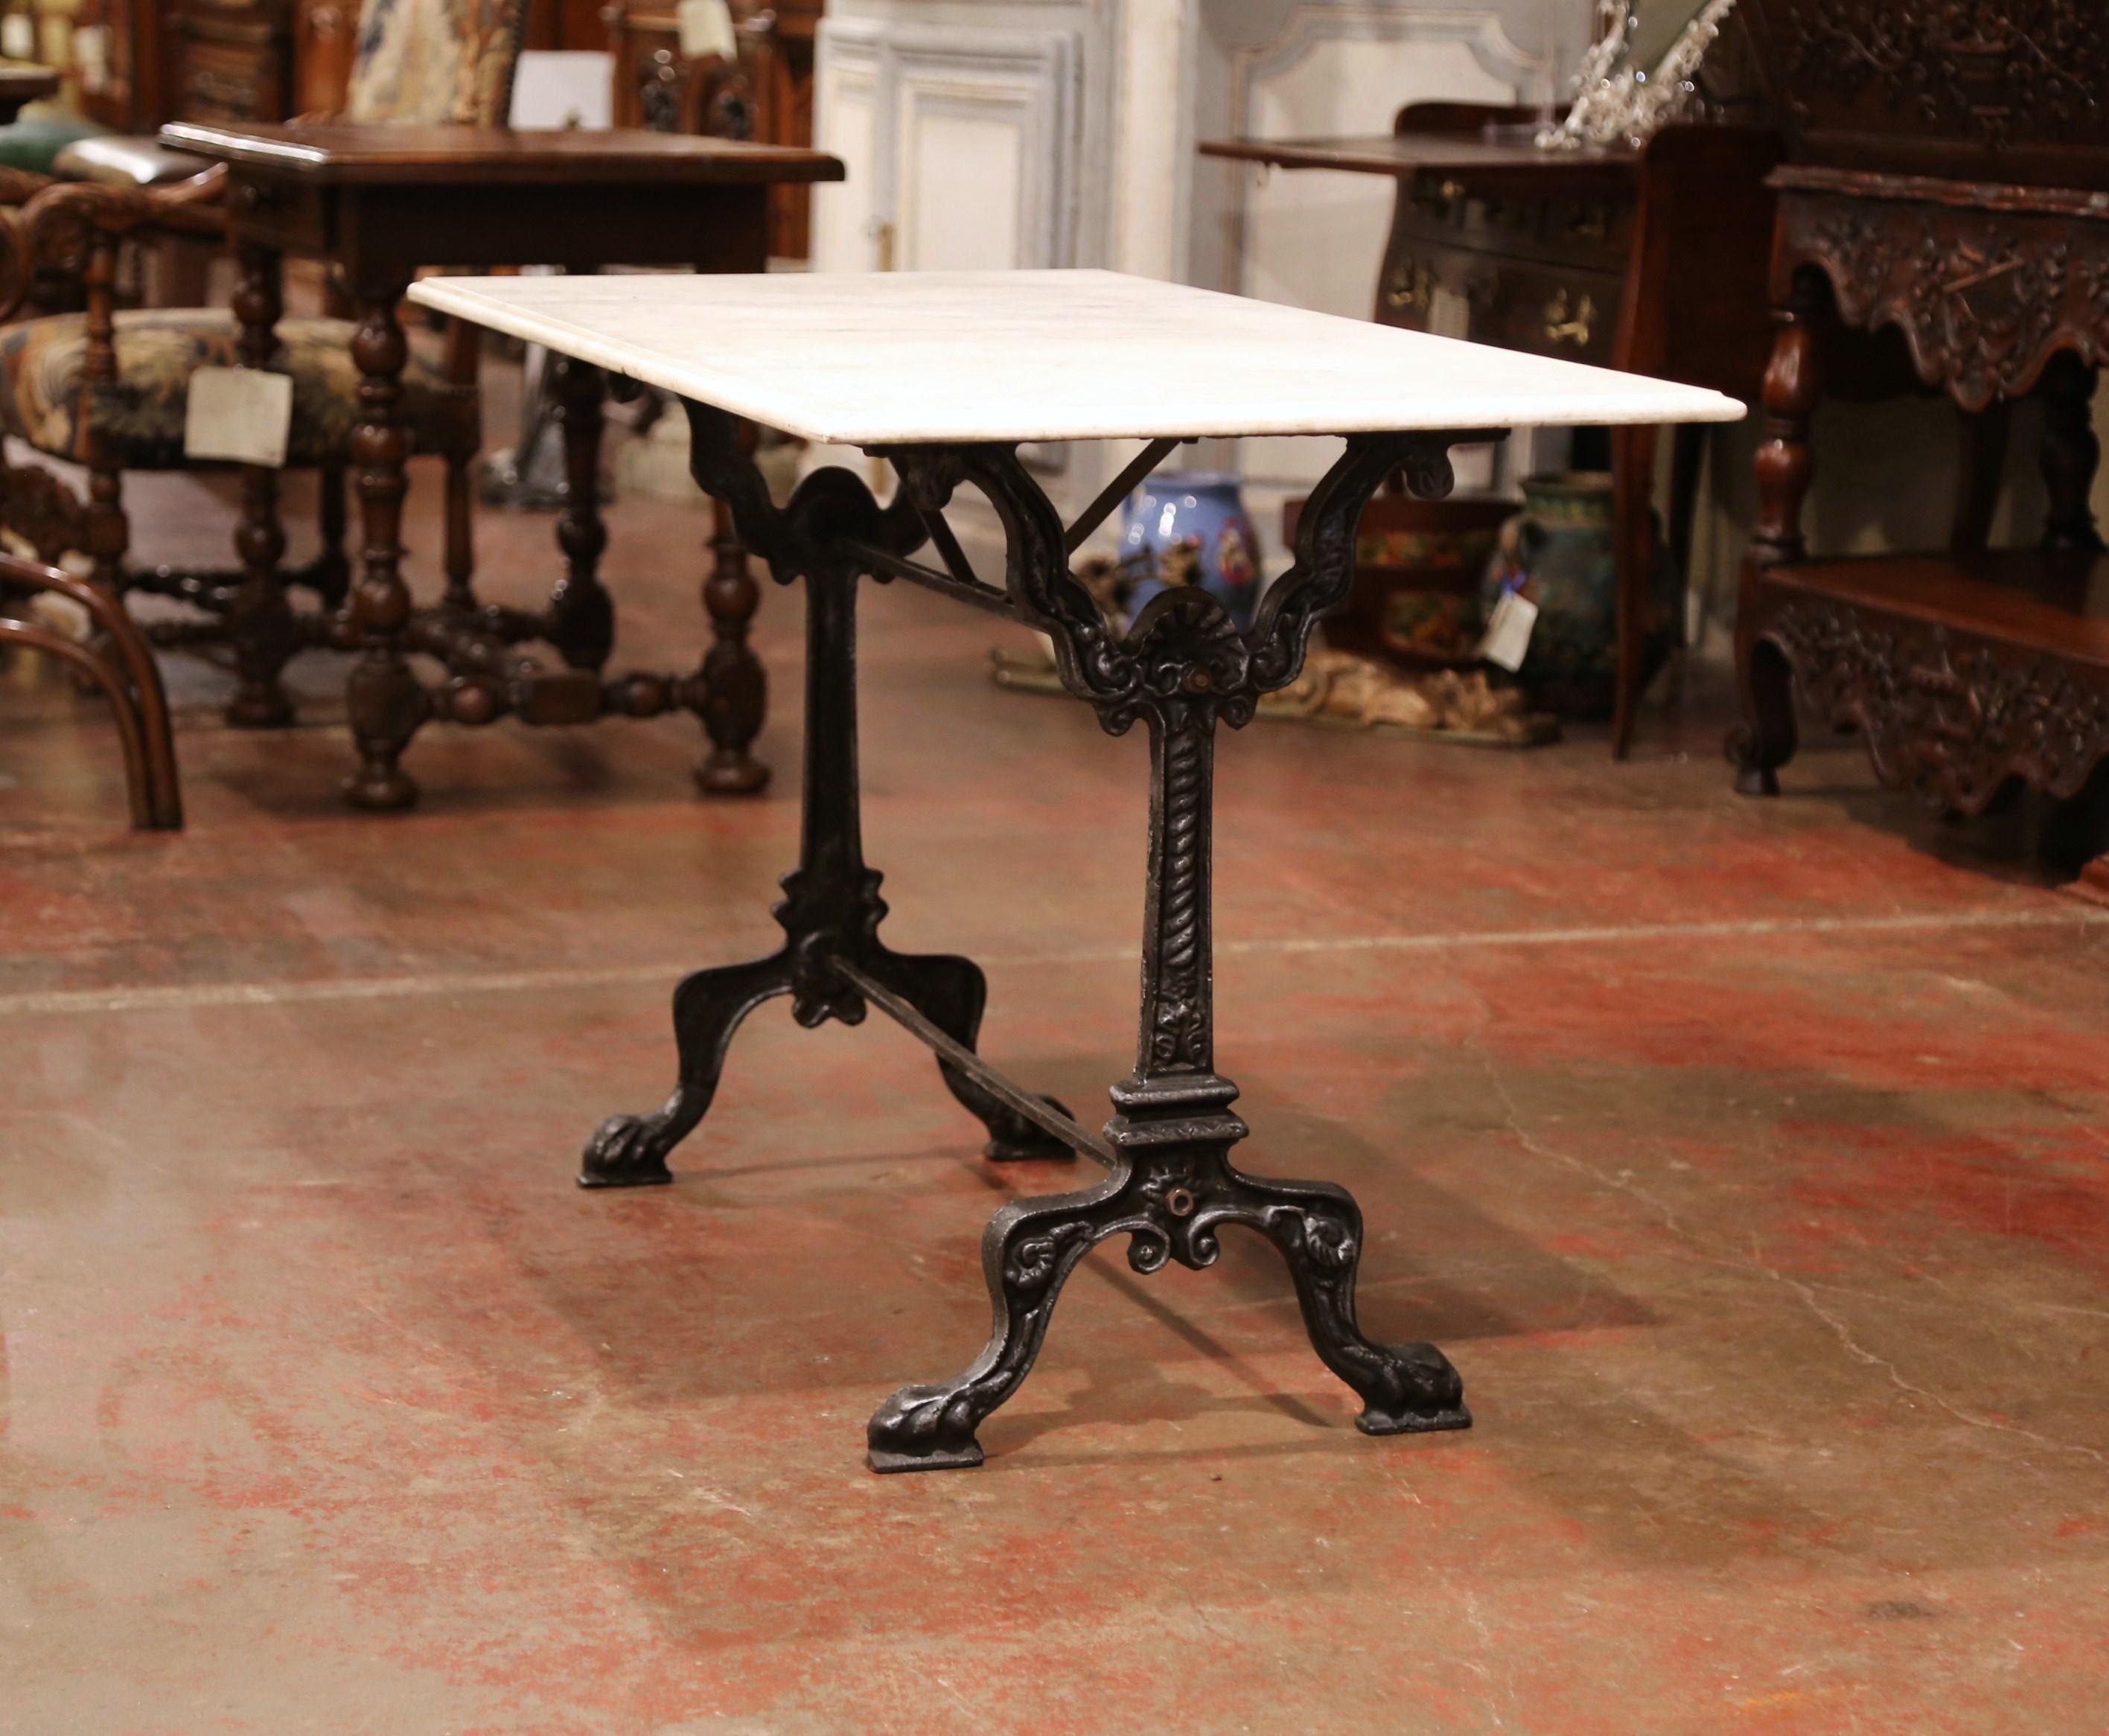 Crafted in France circa 1890, this versatile black iron and white marble table could be used in a variety of settings in your home. The traditional, elegant table sits on two pedestals with scroll legs and paw feet, joined with a double decorative